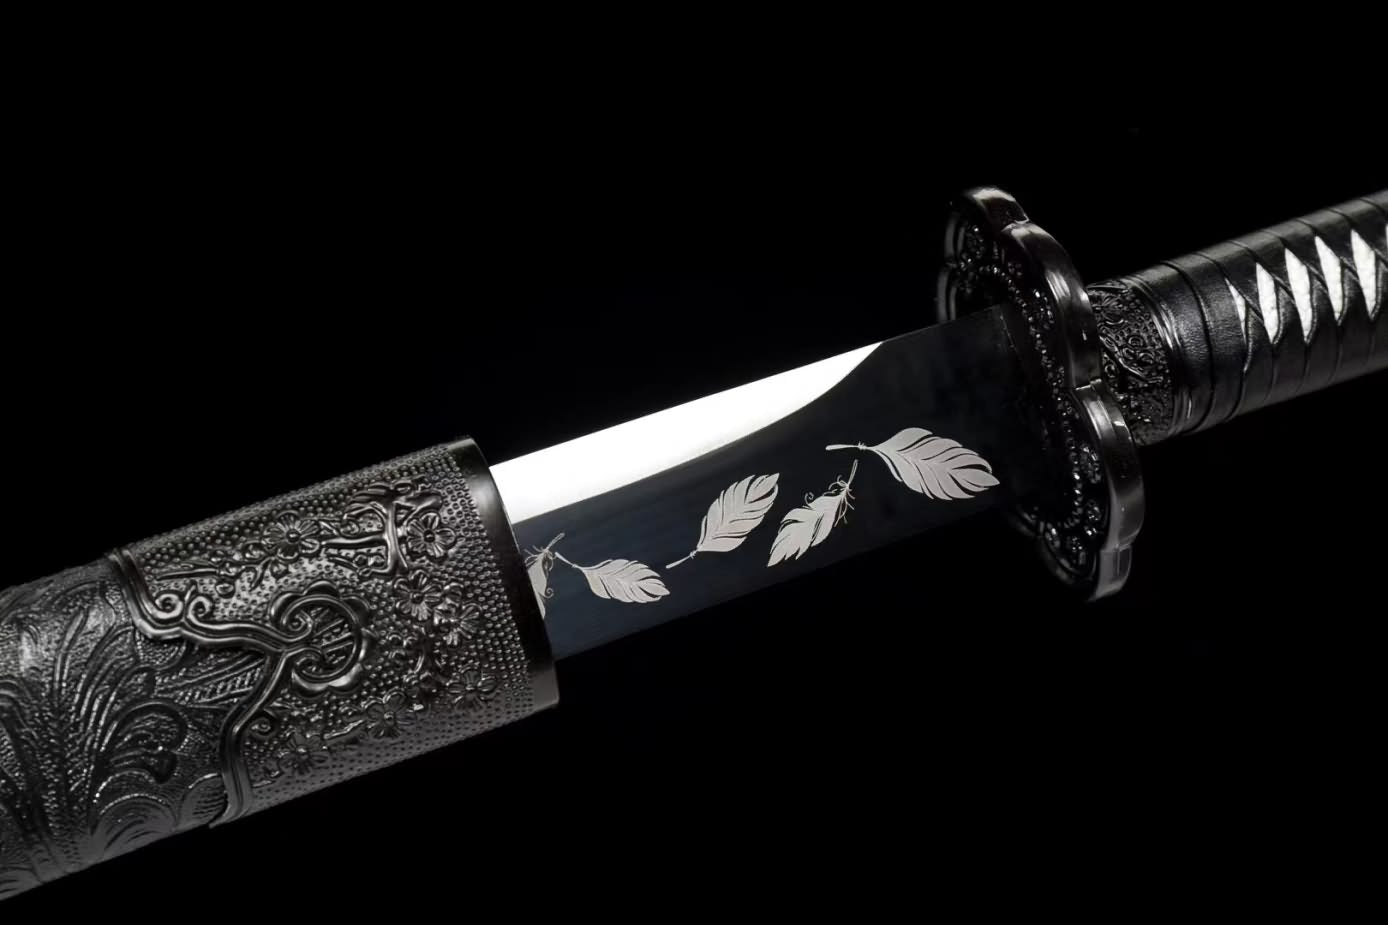 LOONGSWORD,Practical Swords Qing Dao Forged High Carbon Steel Blade,Alloy Fittings